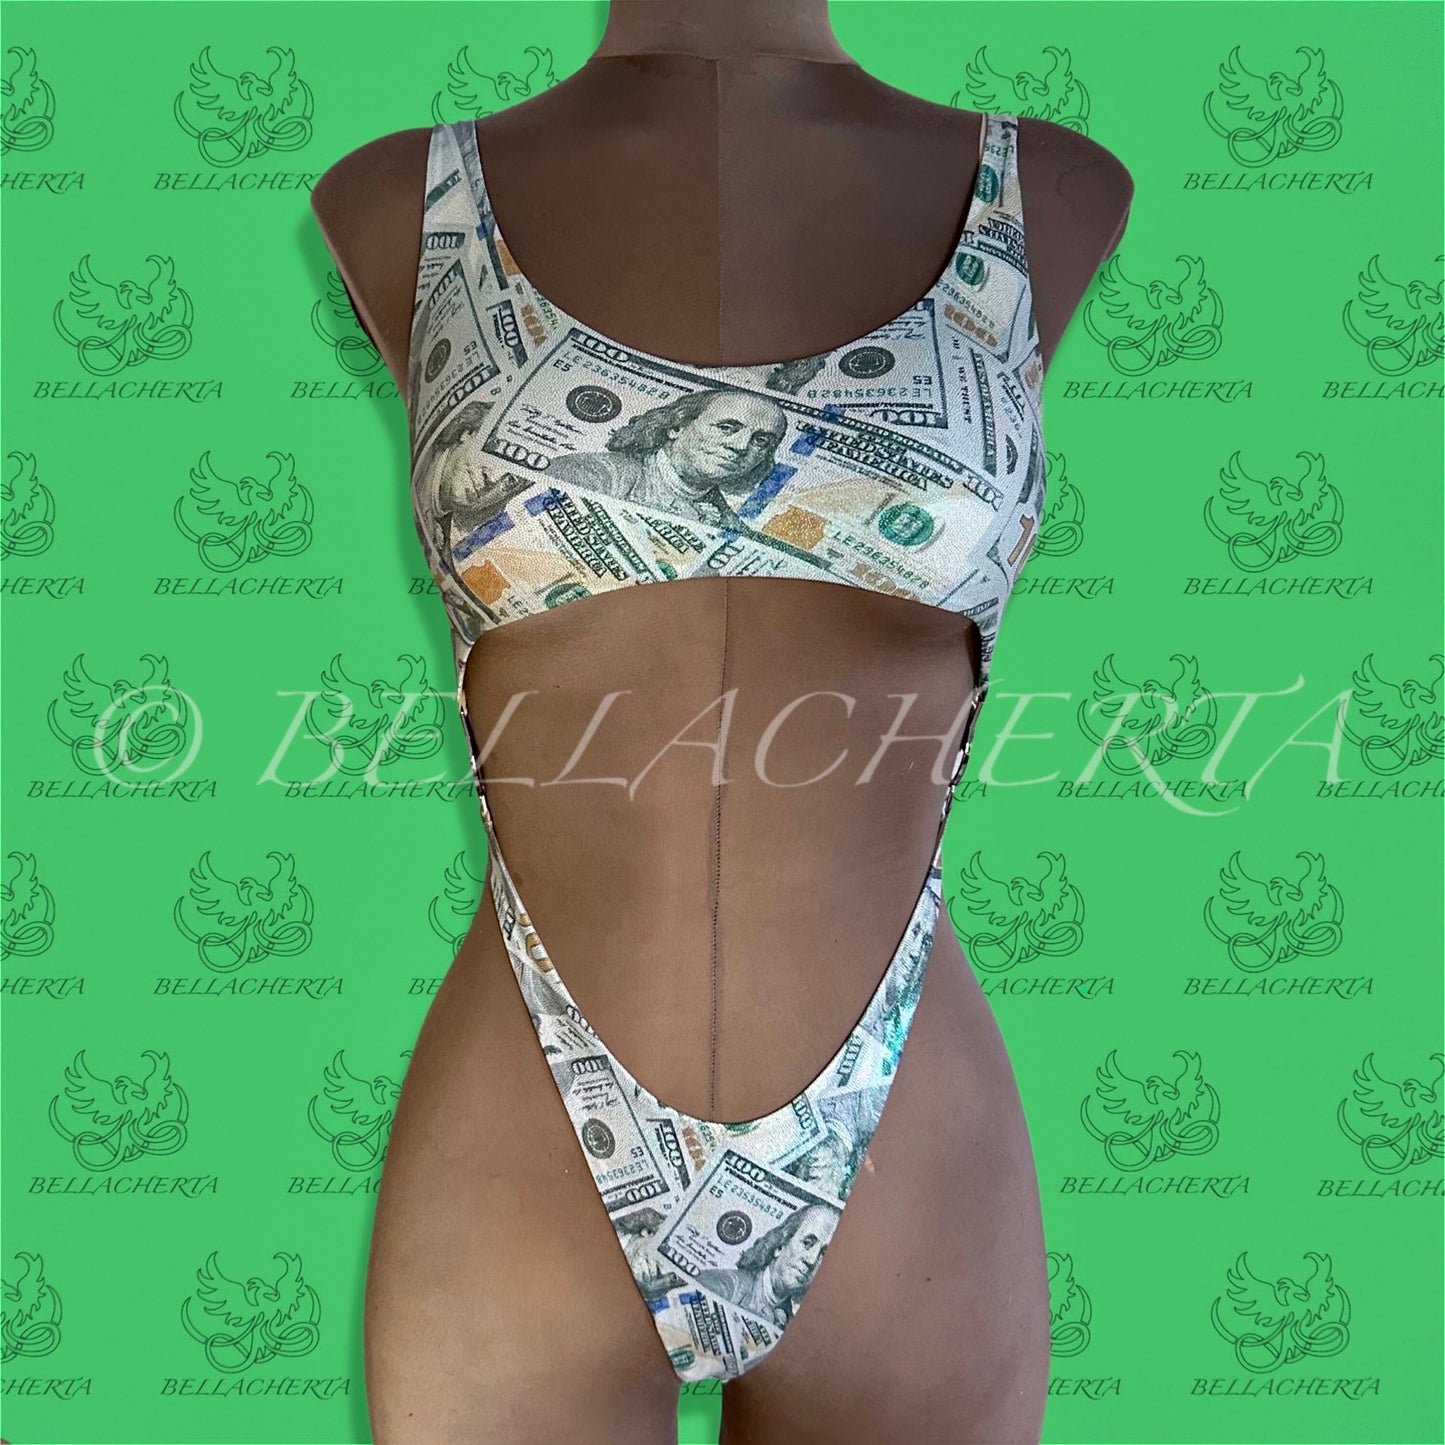 Bellacherta Printed Fabric One-piece Cutout Swimsuit With Silver Buckles, Carnival Monday Wear, Money Print